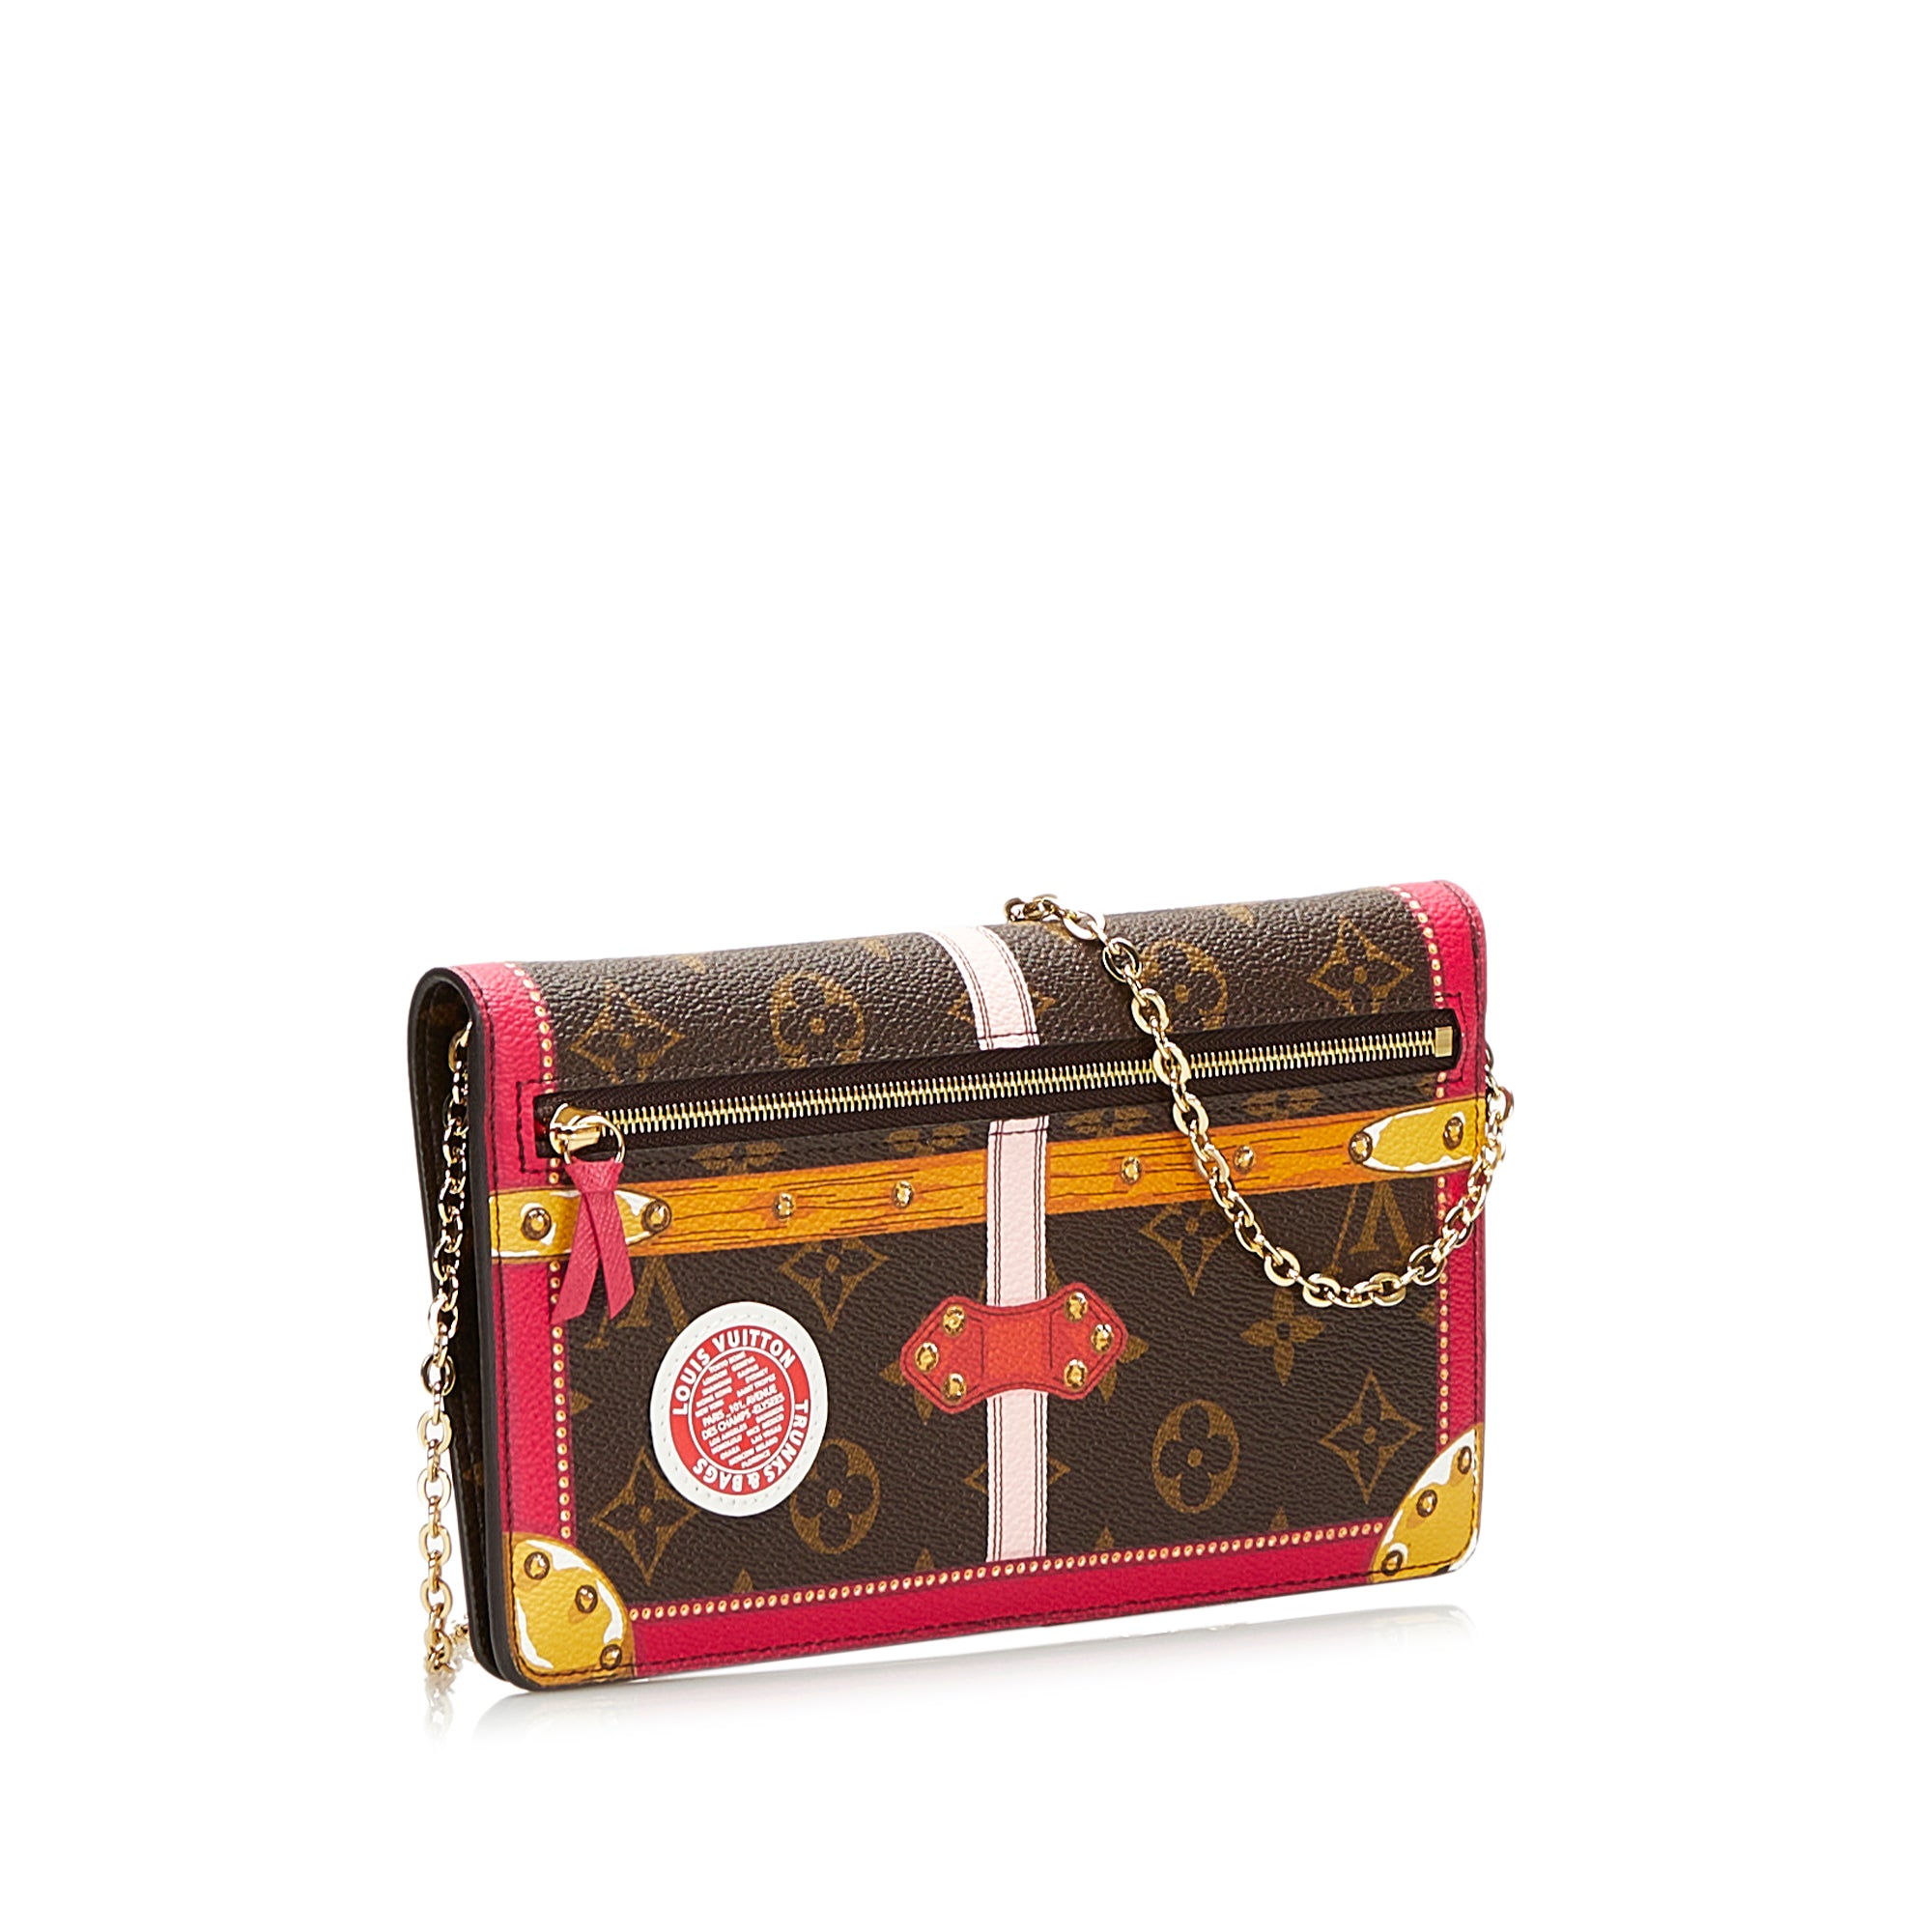 Louis Vuitton Trunks and Bags Limited Edition Monogram Canvas